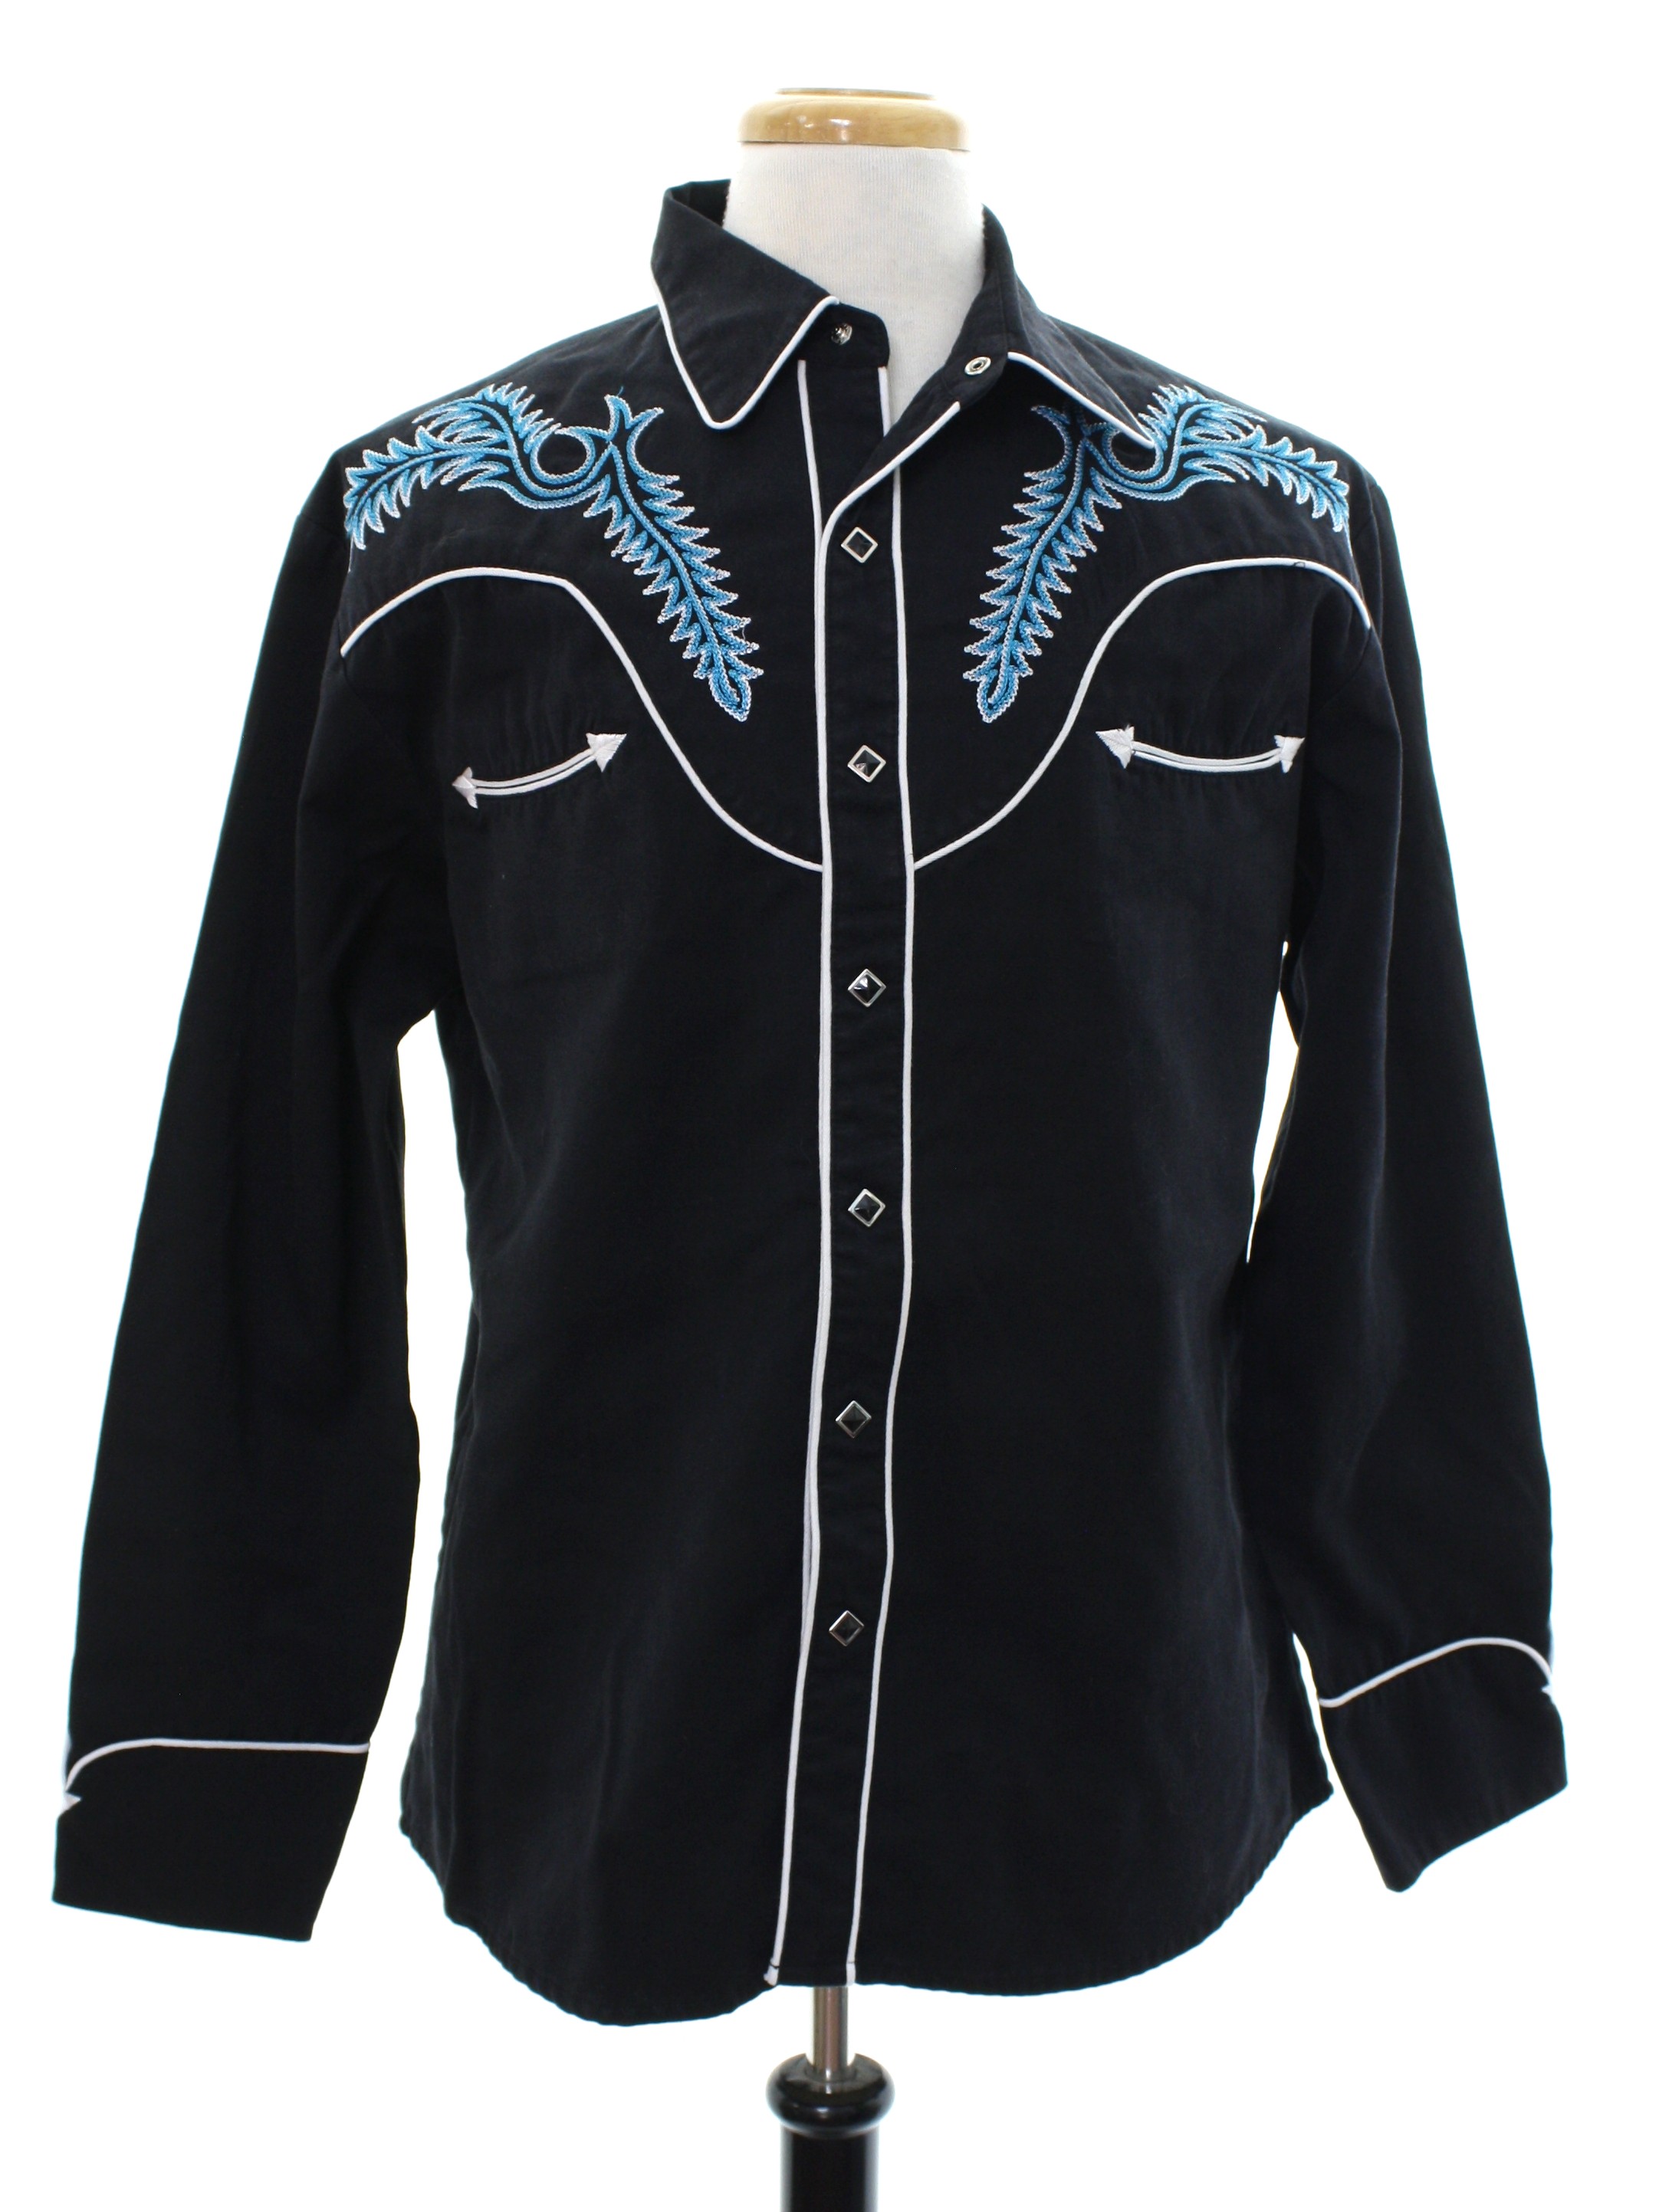 Western Shirt: 90s -Scully Since 1906- Mens black background heavy ...